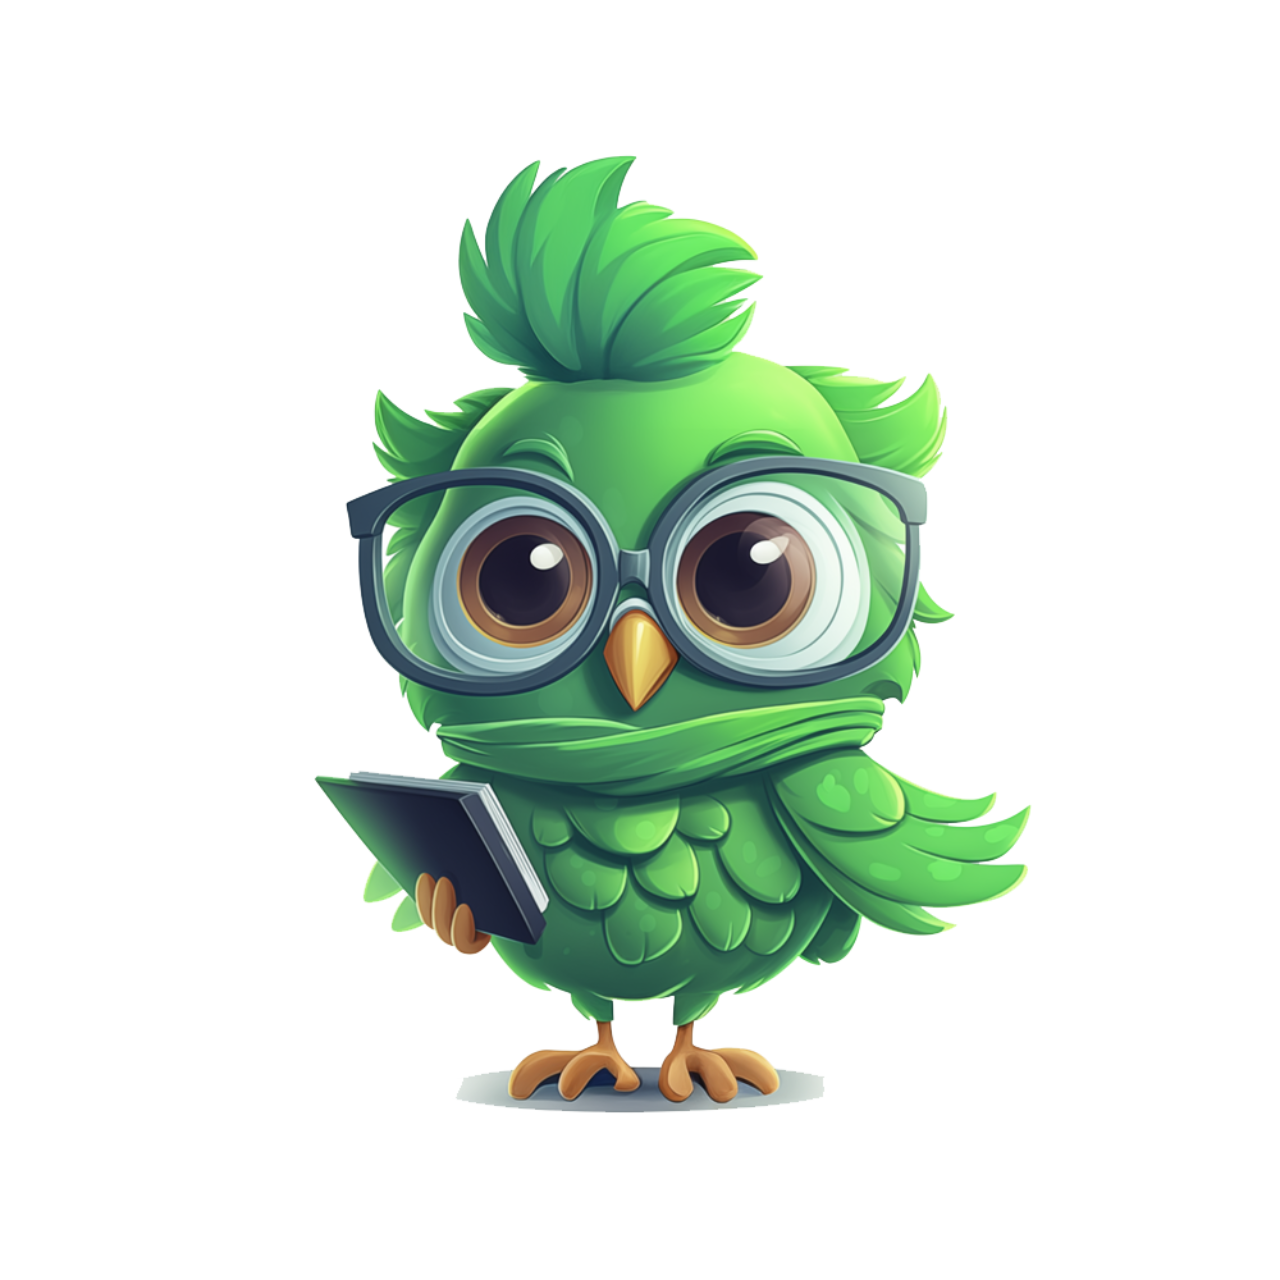 Owlfred - Shopify Expert & Owl